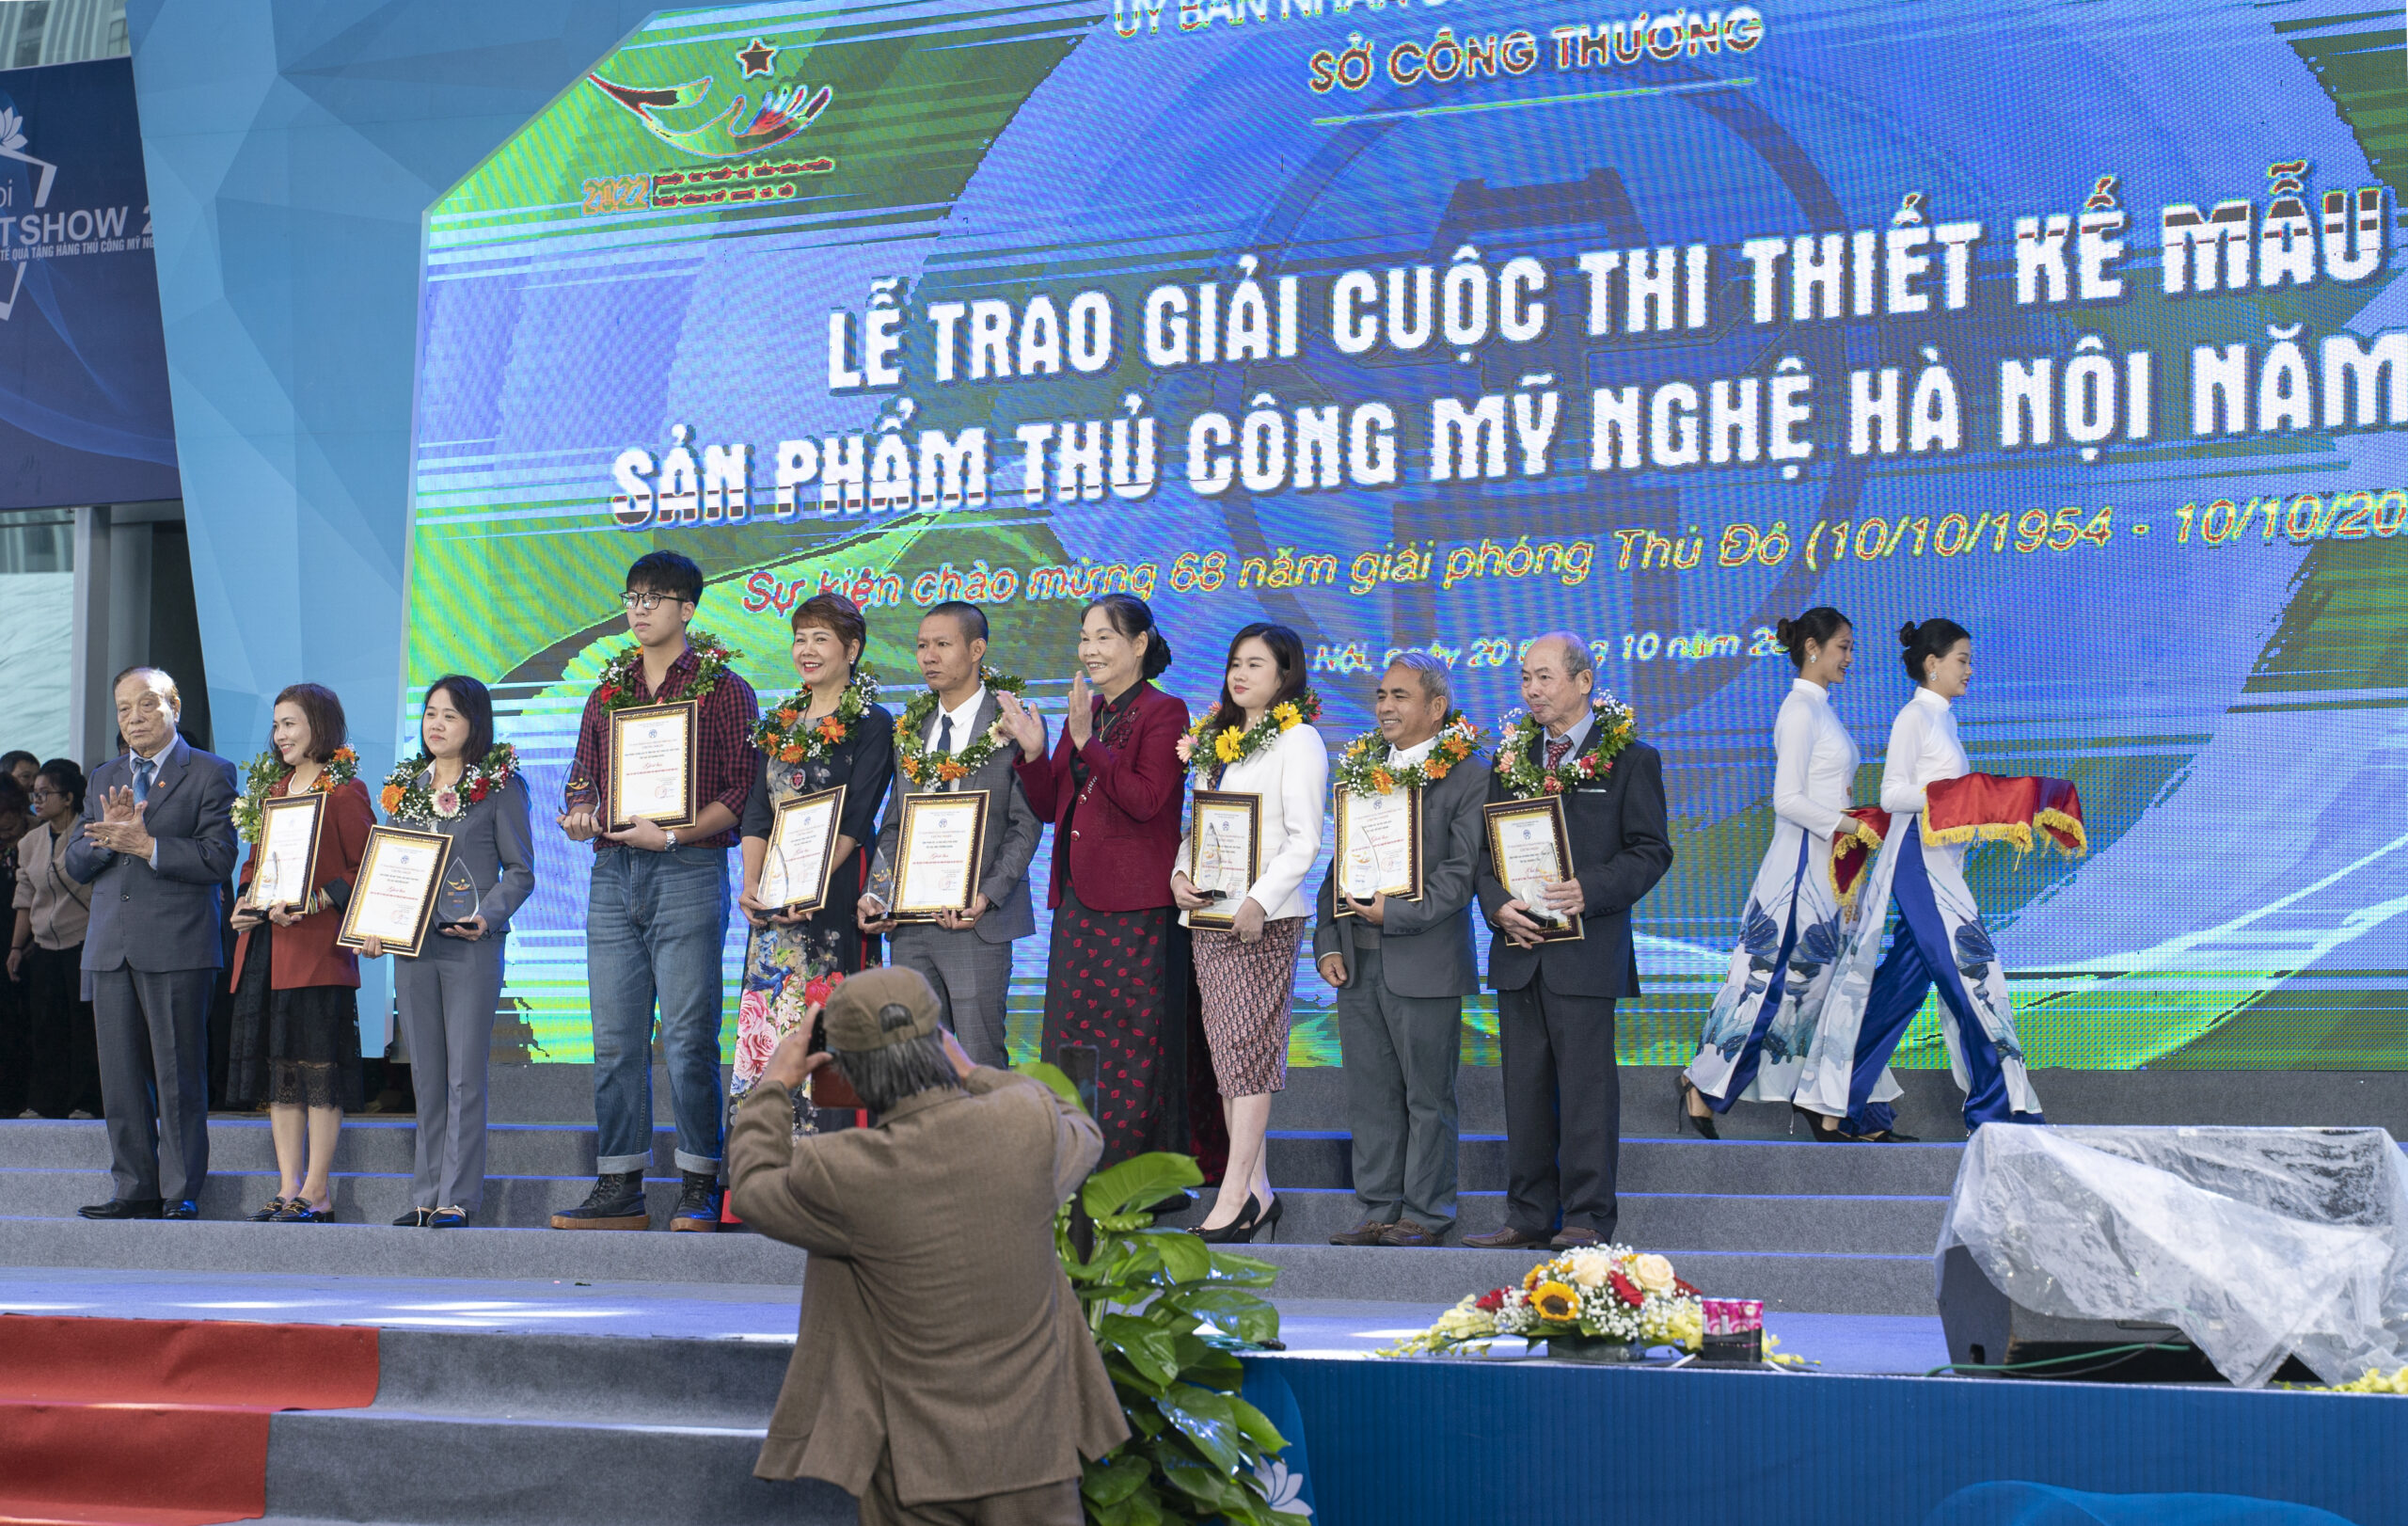 Winning an award in the craft competition at the 10th Hanoi Gift Show Trade Fair   